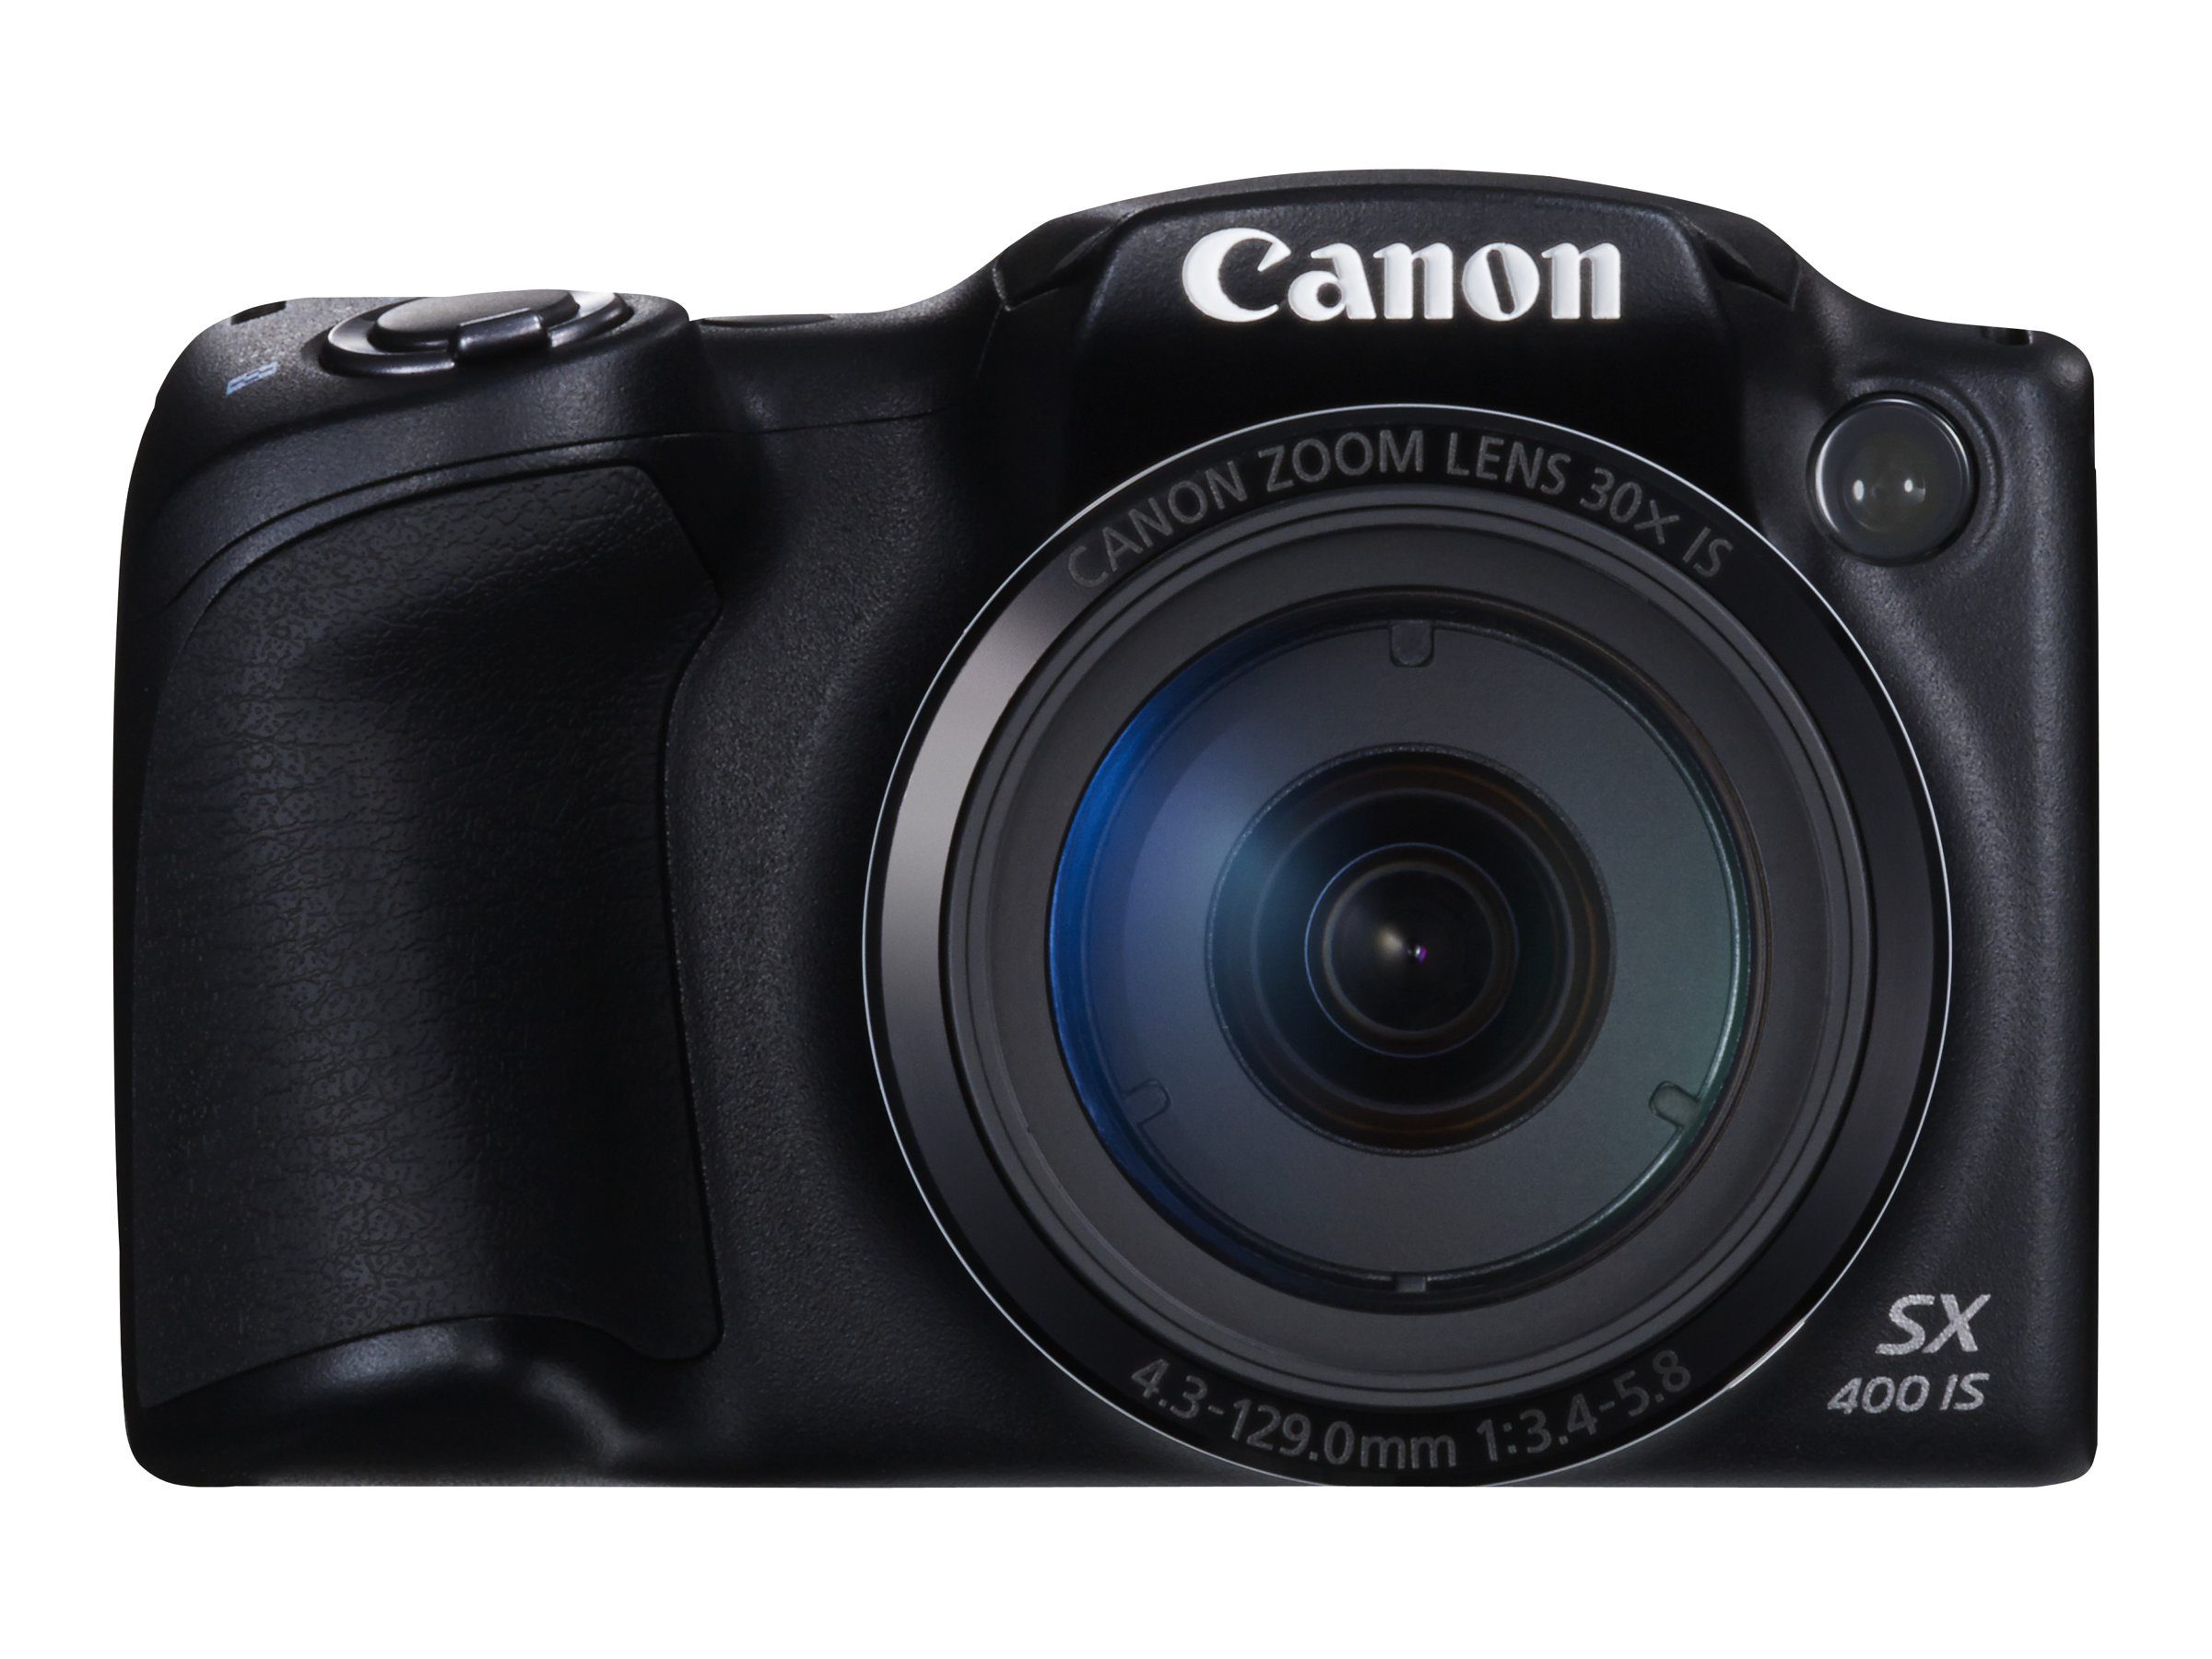 Canon PowerShot SX400 IS - Digital camera - compact - 16.0 MP - 720p - 30x optical zoom - black - image 4 of 9